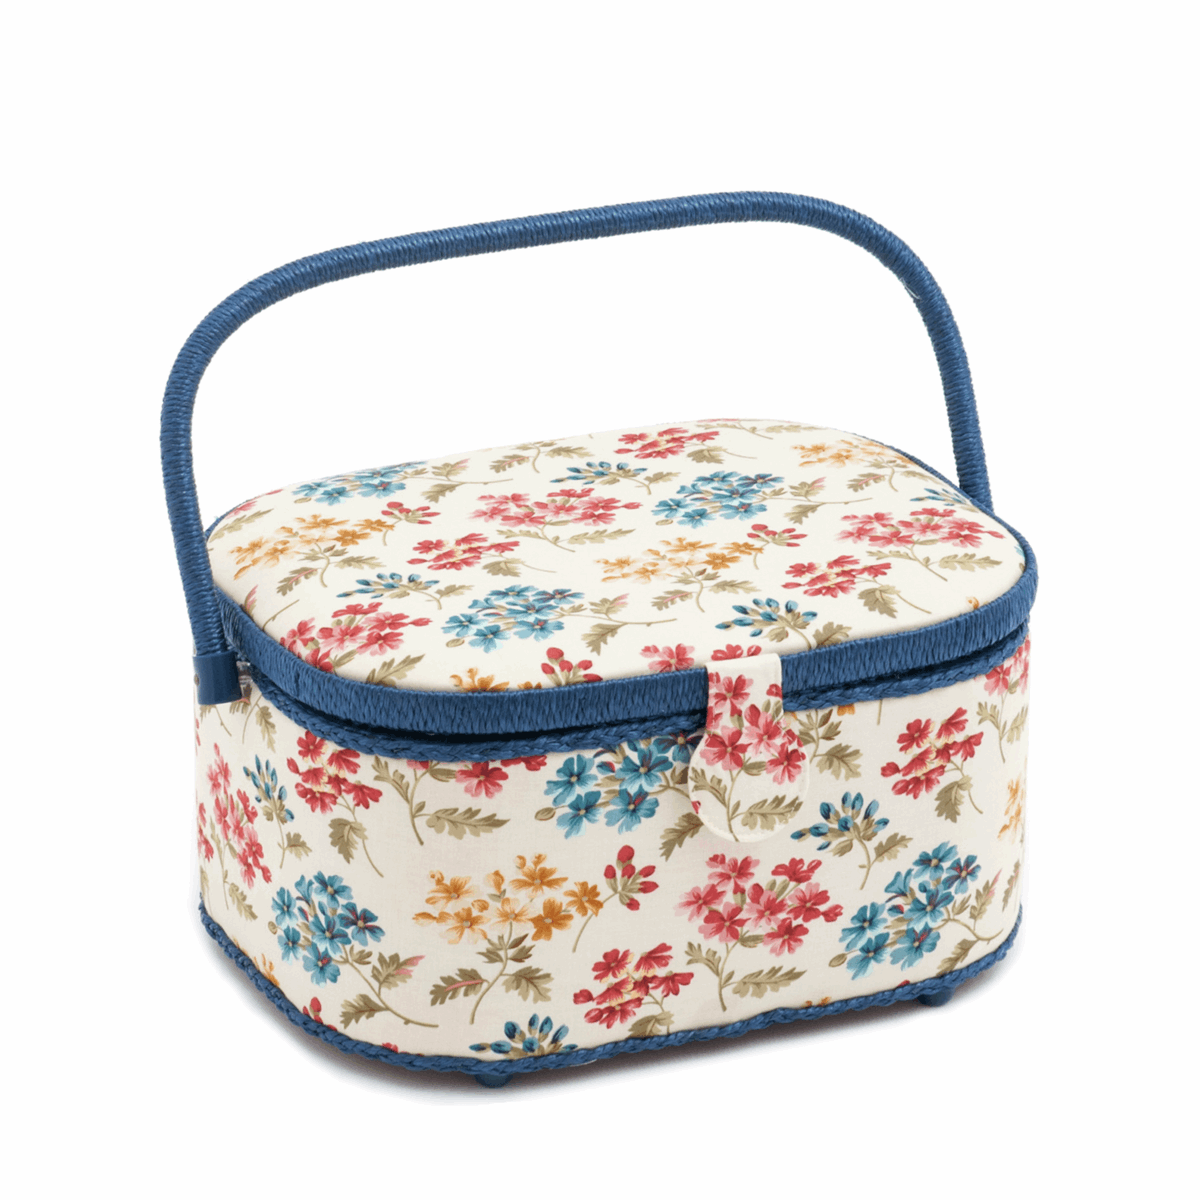 Fairfield Sewing Box - Large Oval